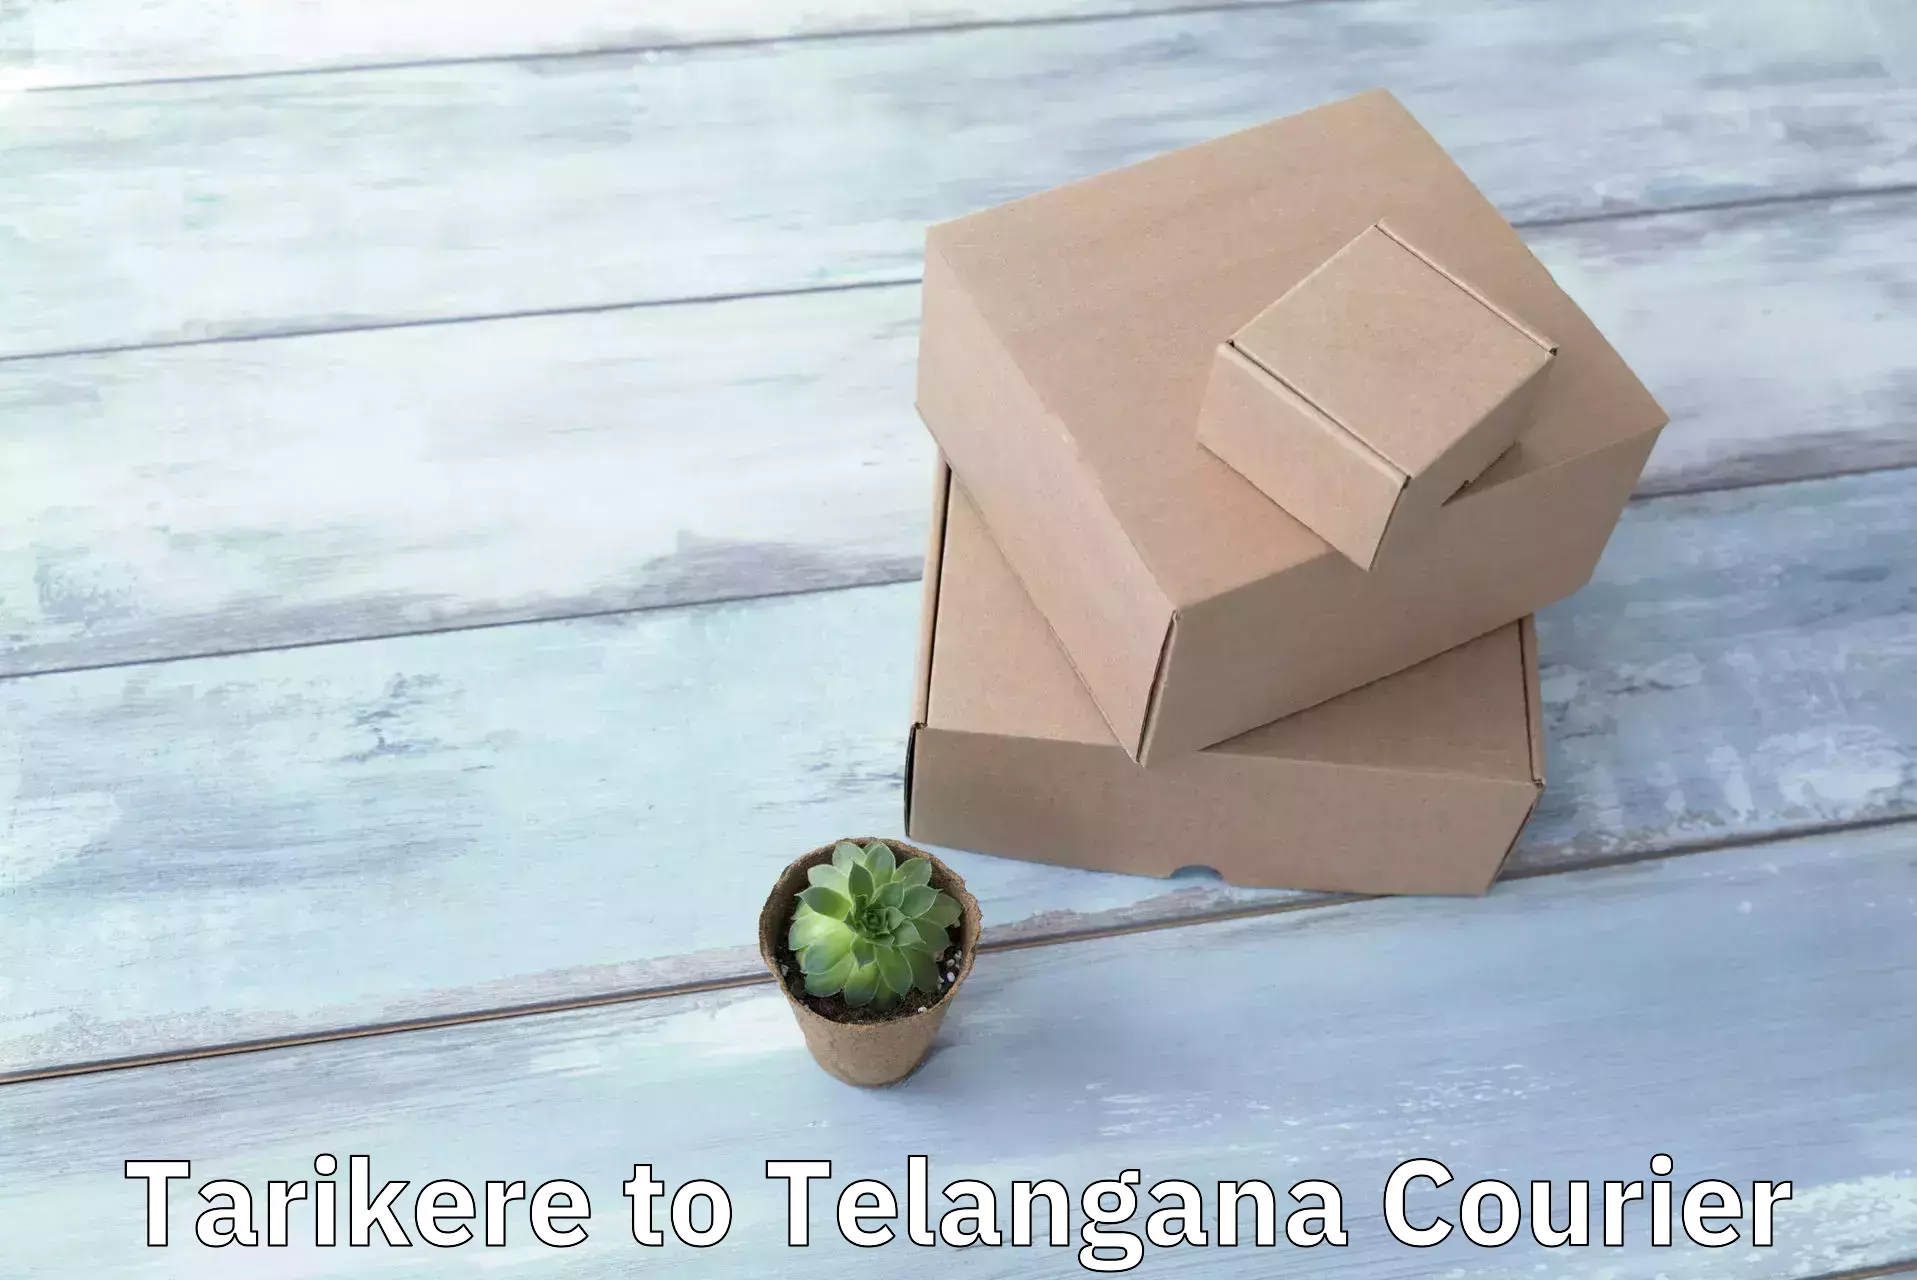 Full-service courier options Tarikere to Hyderabad